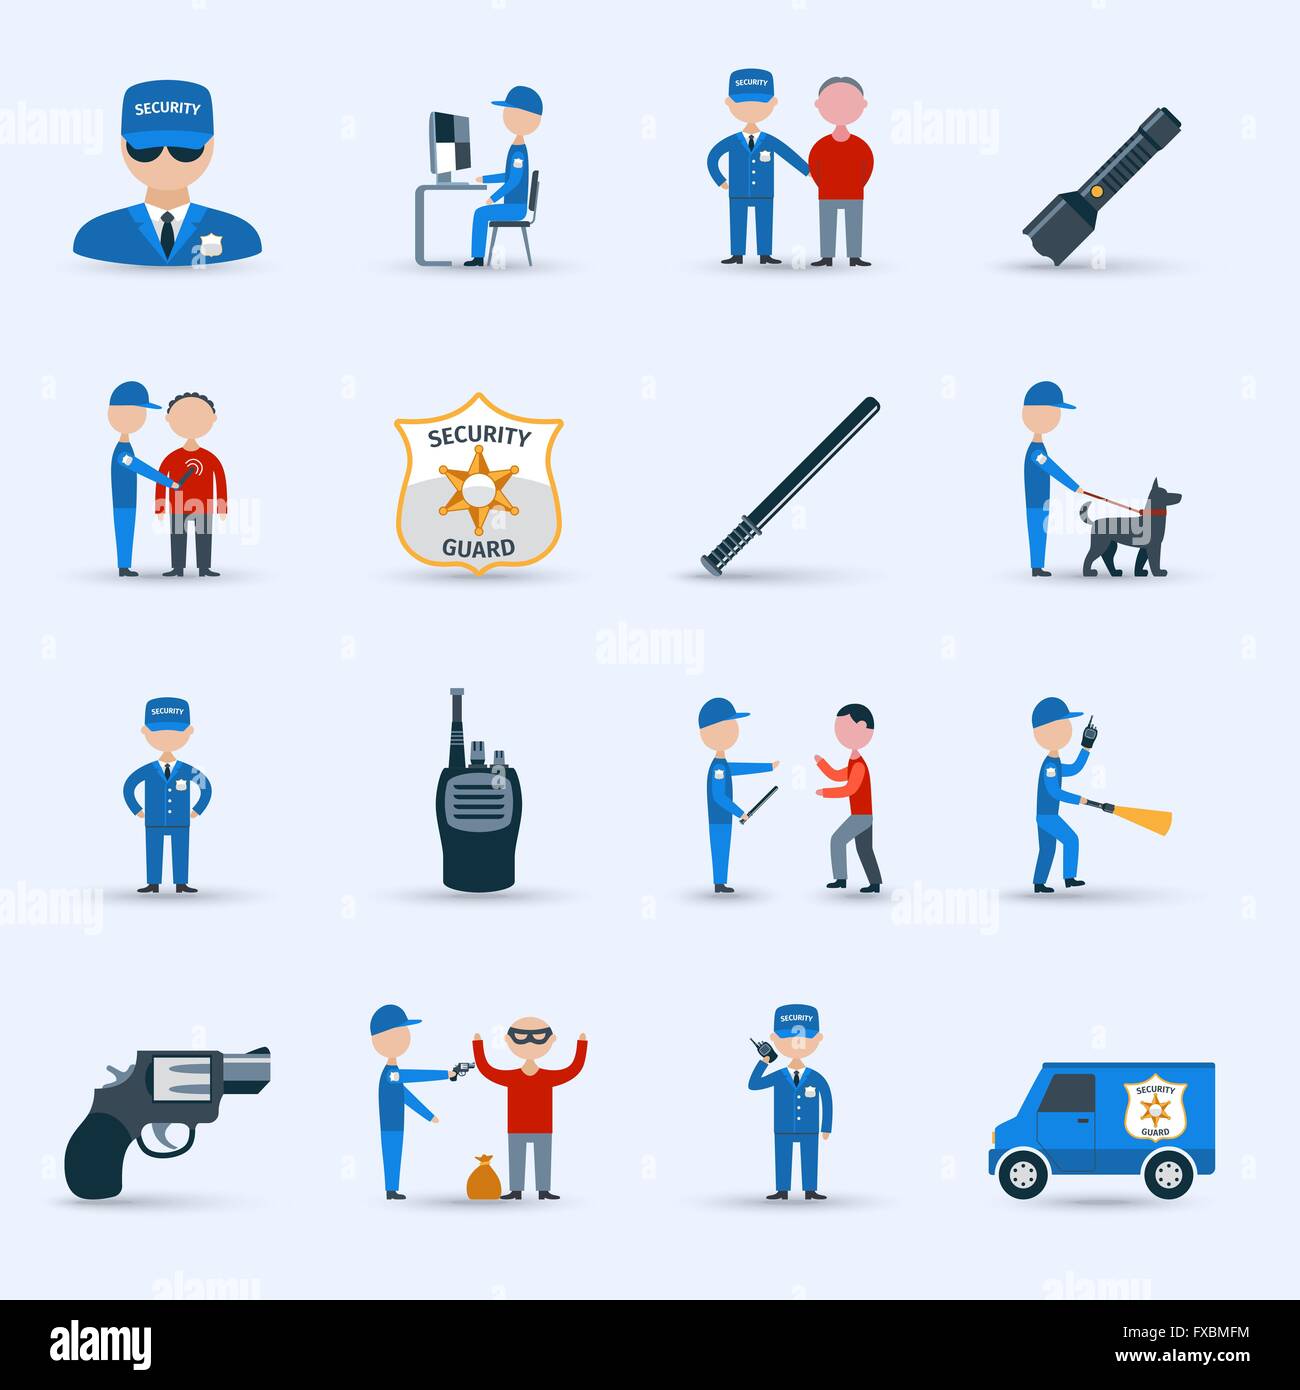 Security guard service icons set Stock Vector